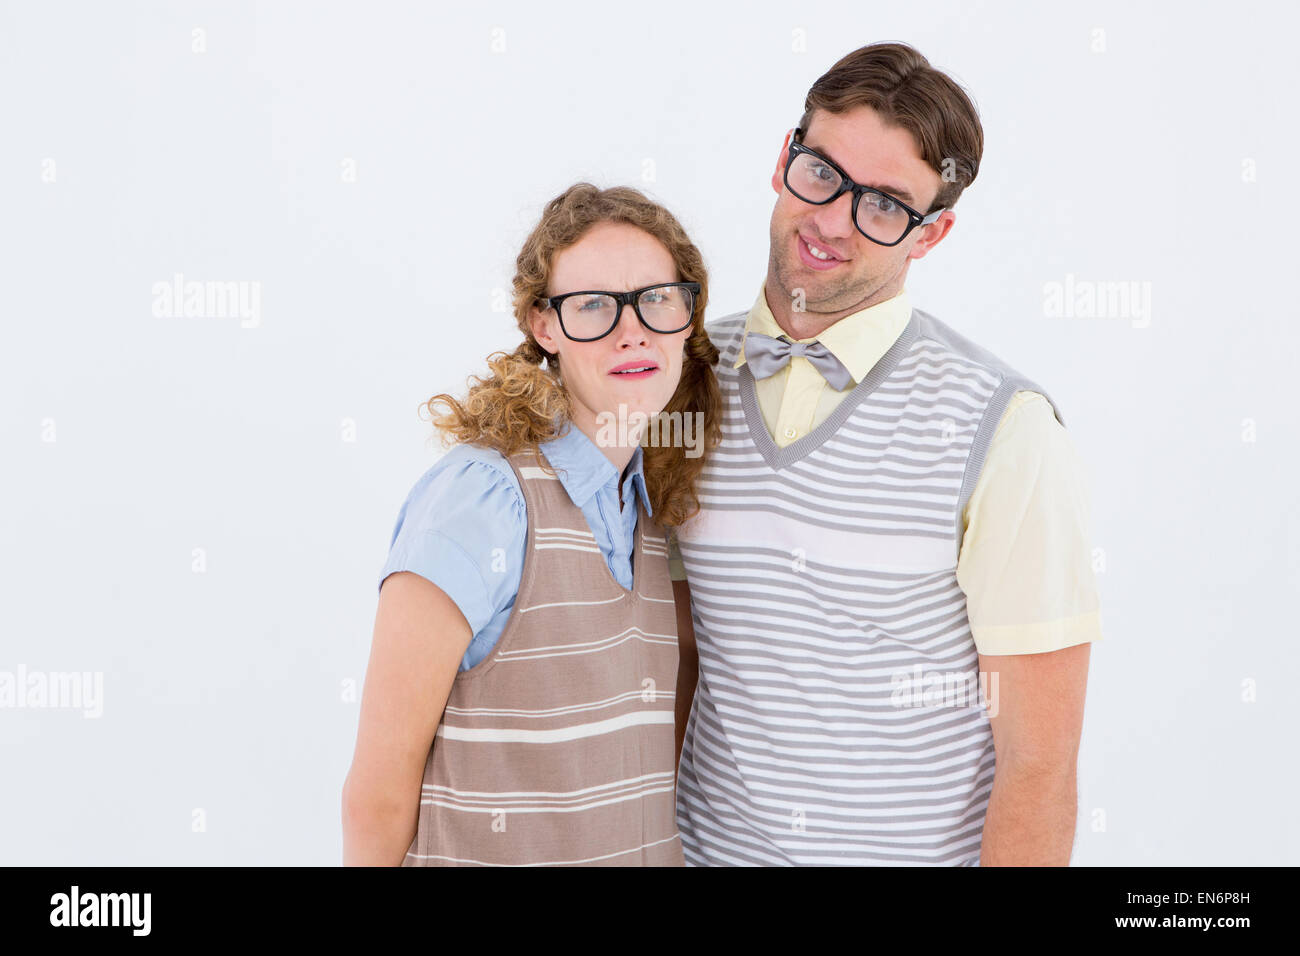 Felice geeky hipster giovane con facce silly Foto Stock